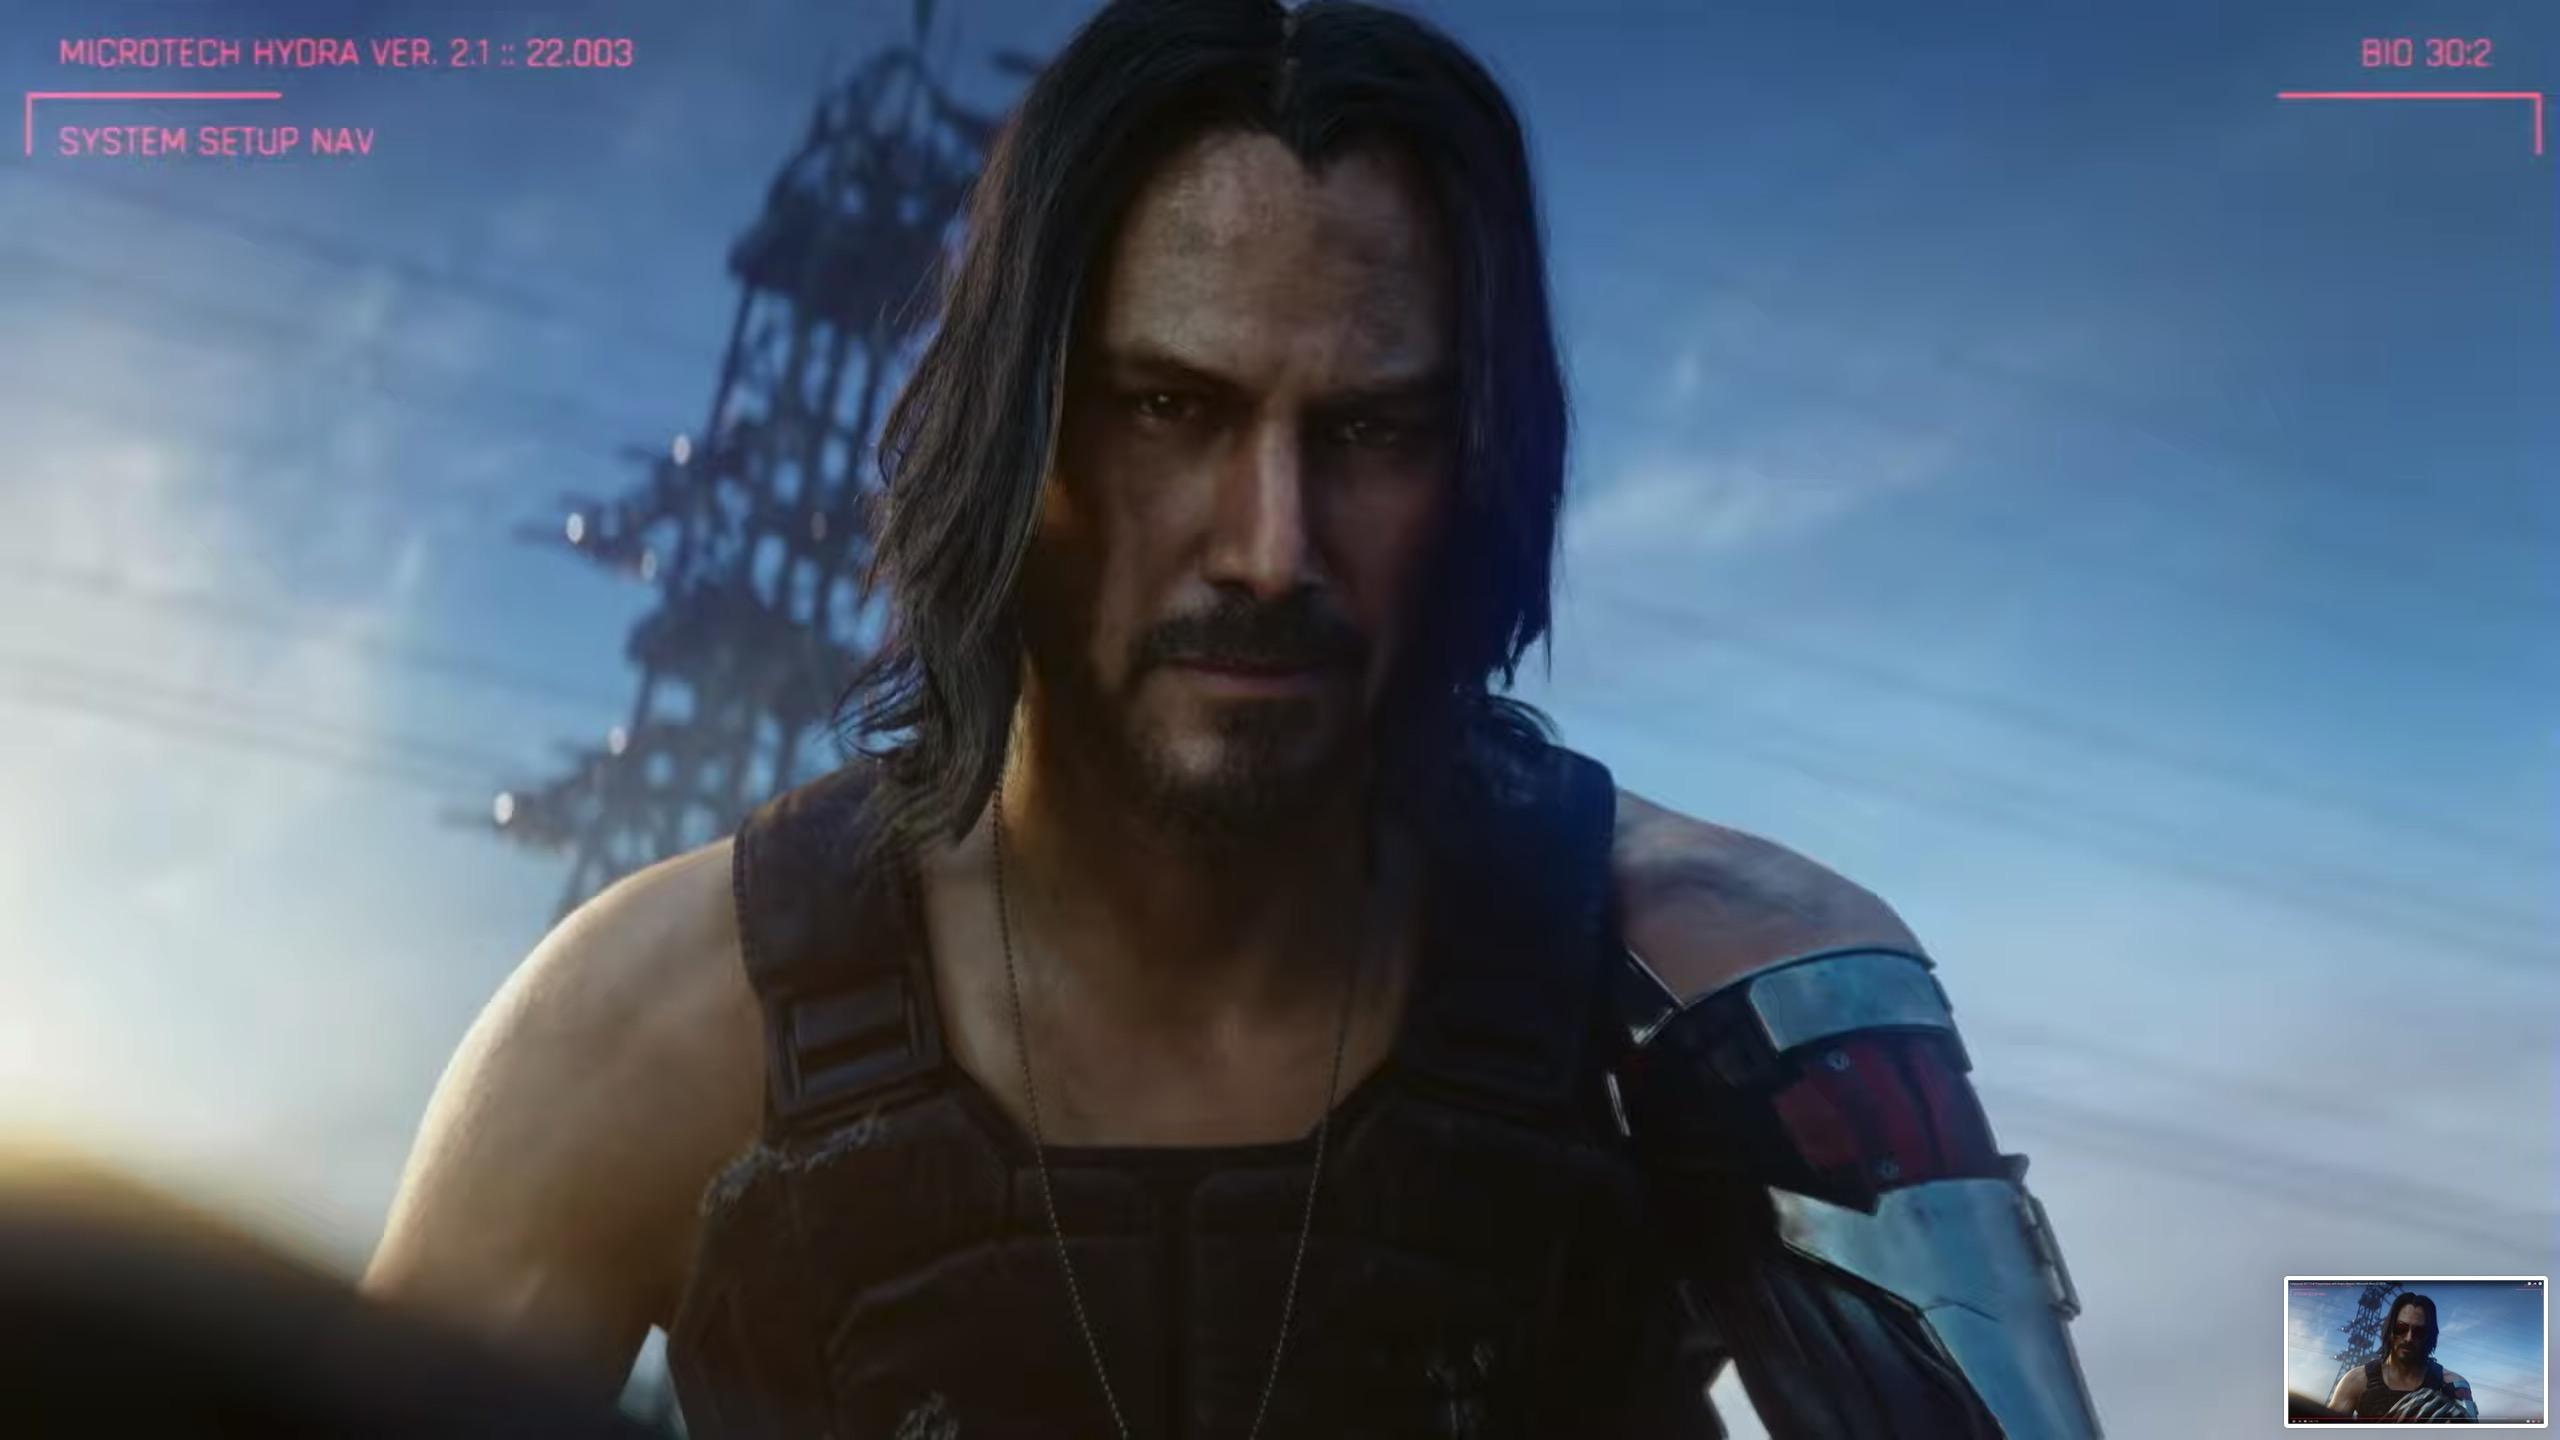 Keanu Reeves present the trailer for Cyberpunk 2077 / Boing Boing